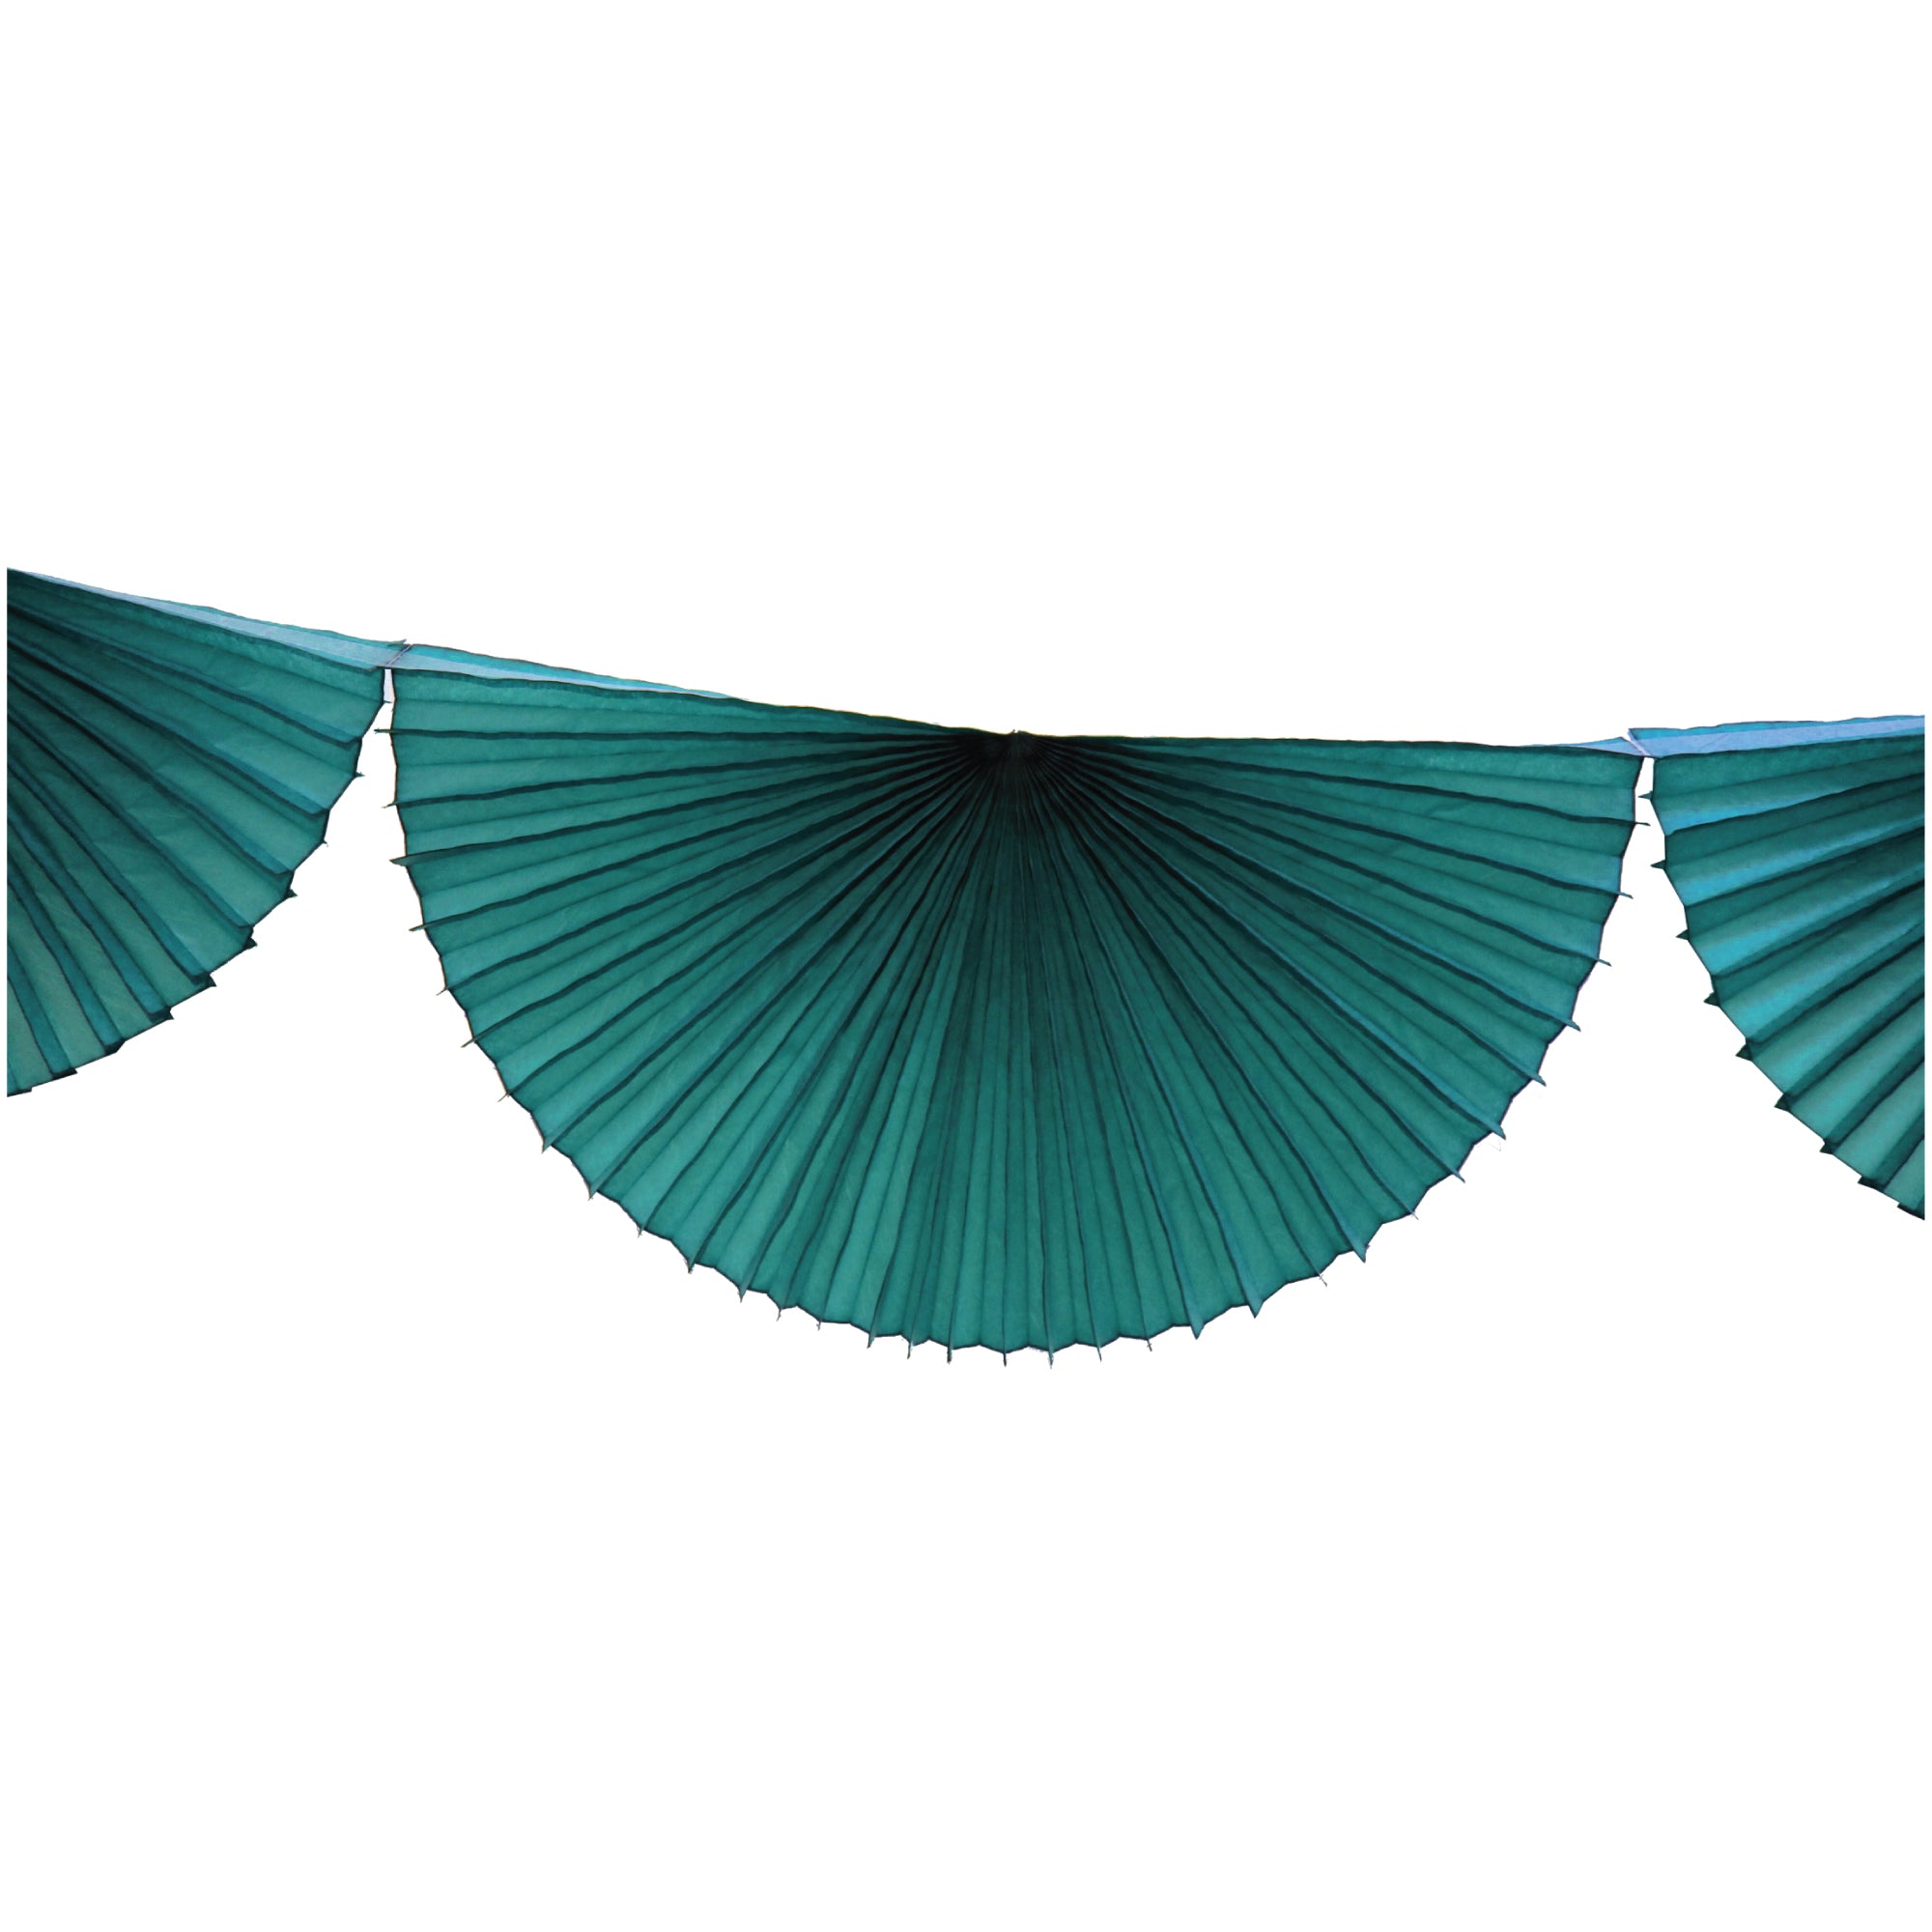 Teal Bunting Fan Garland 10ft | The Party Darling